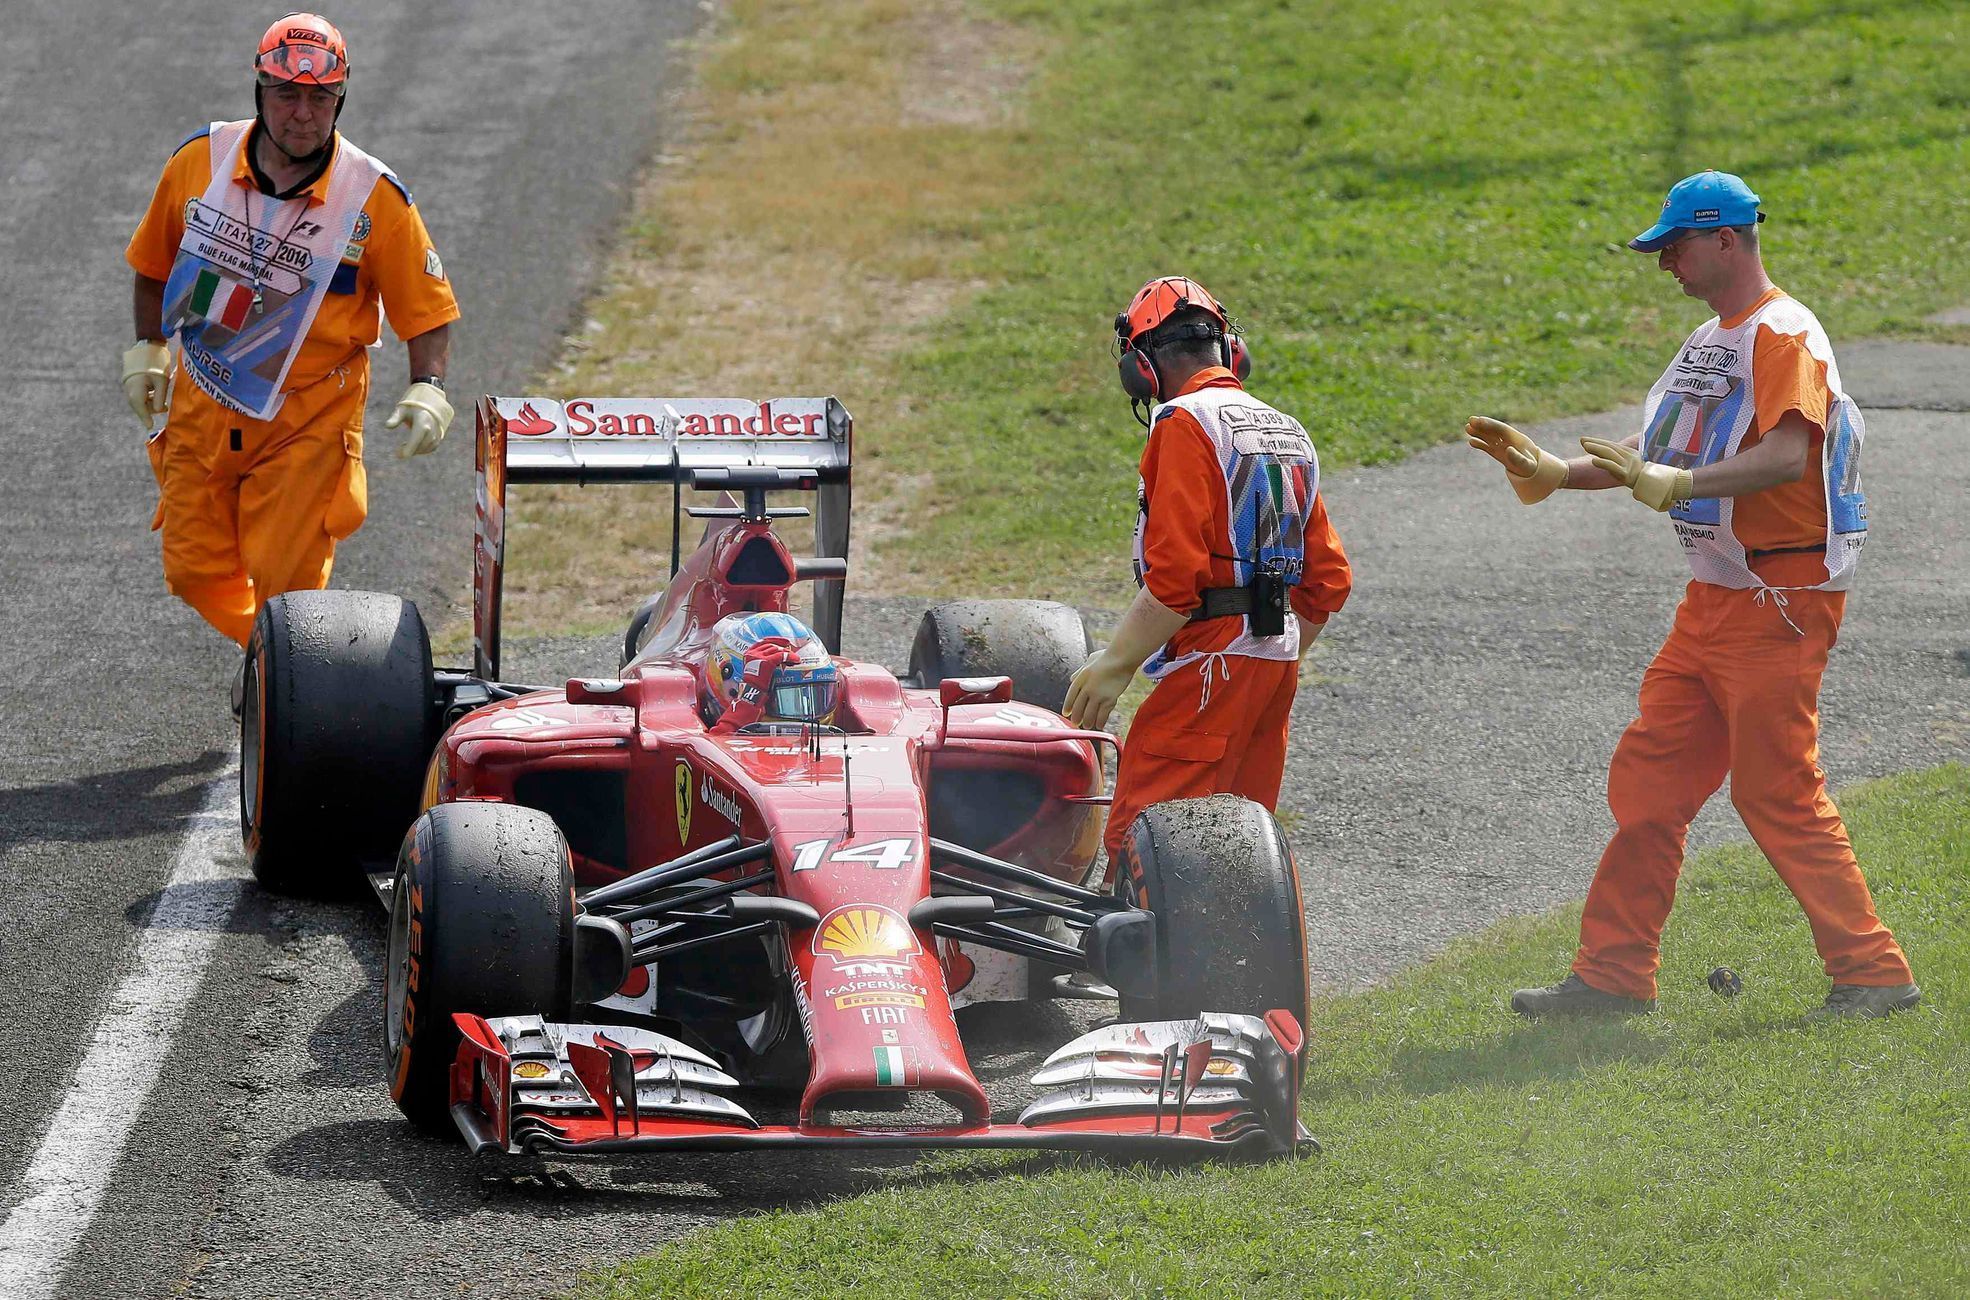 Ferrari Formula One driver Alonso of Spain stops the race as his car breaks down during the Italian F1 Grand Prix in Monza